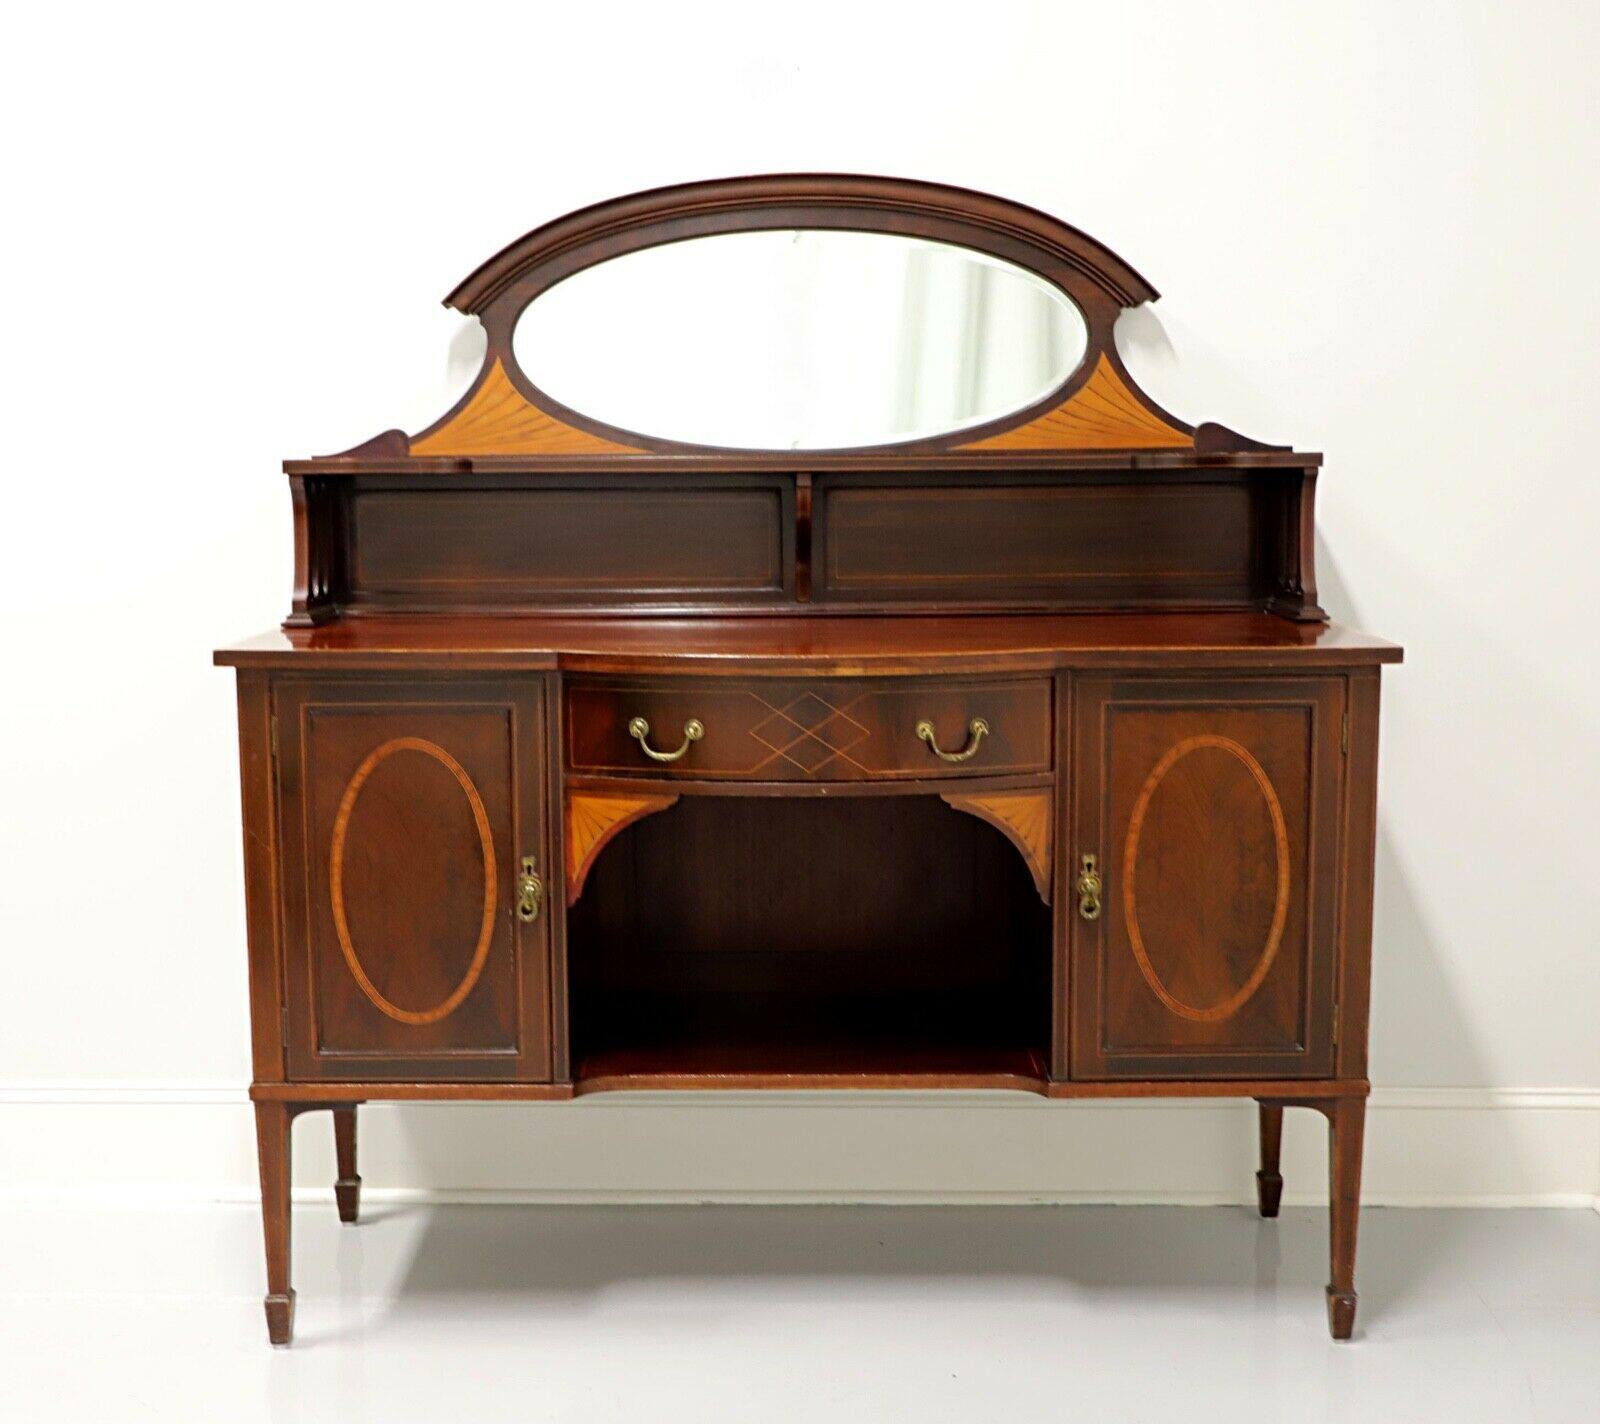 An antique 19th century Hepplewhite style sideboard by Maple & Company. Mahogany with inlaid satinwood & mahogany, brass hardware, upper gallery with mirror and spade feet. Features a raised upper gallery with center oval mirror, one center drawer